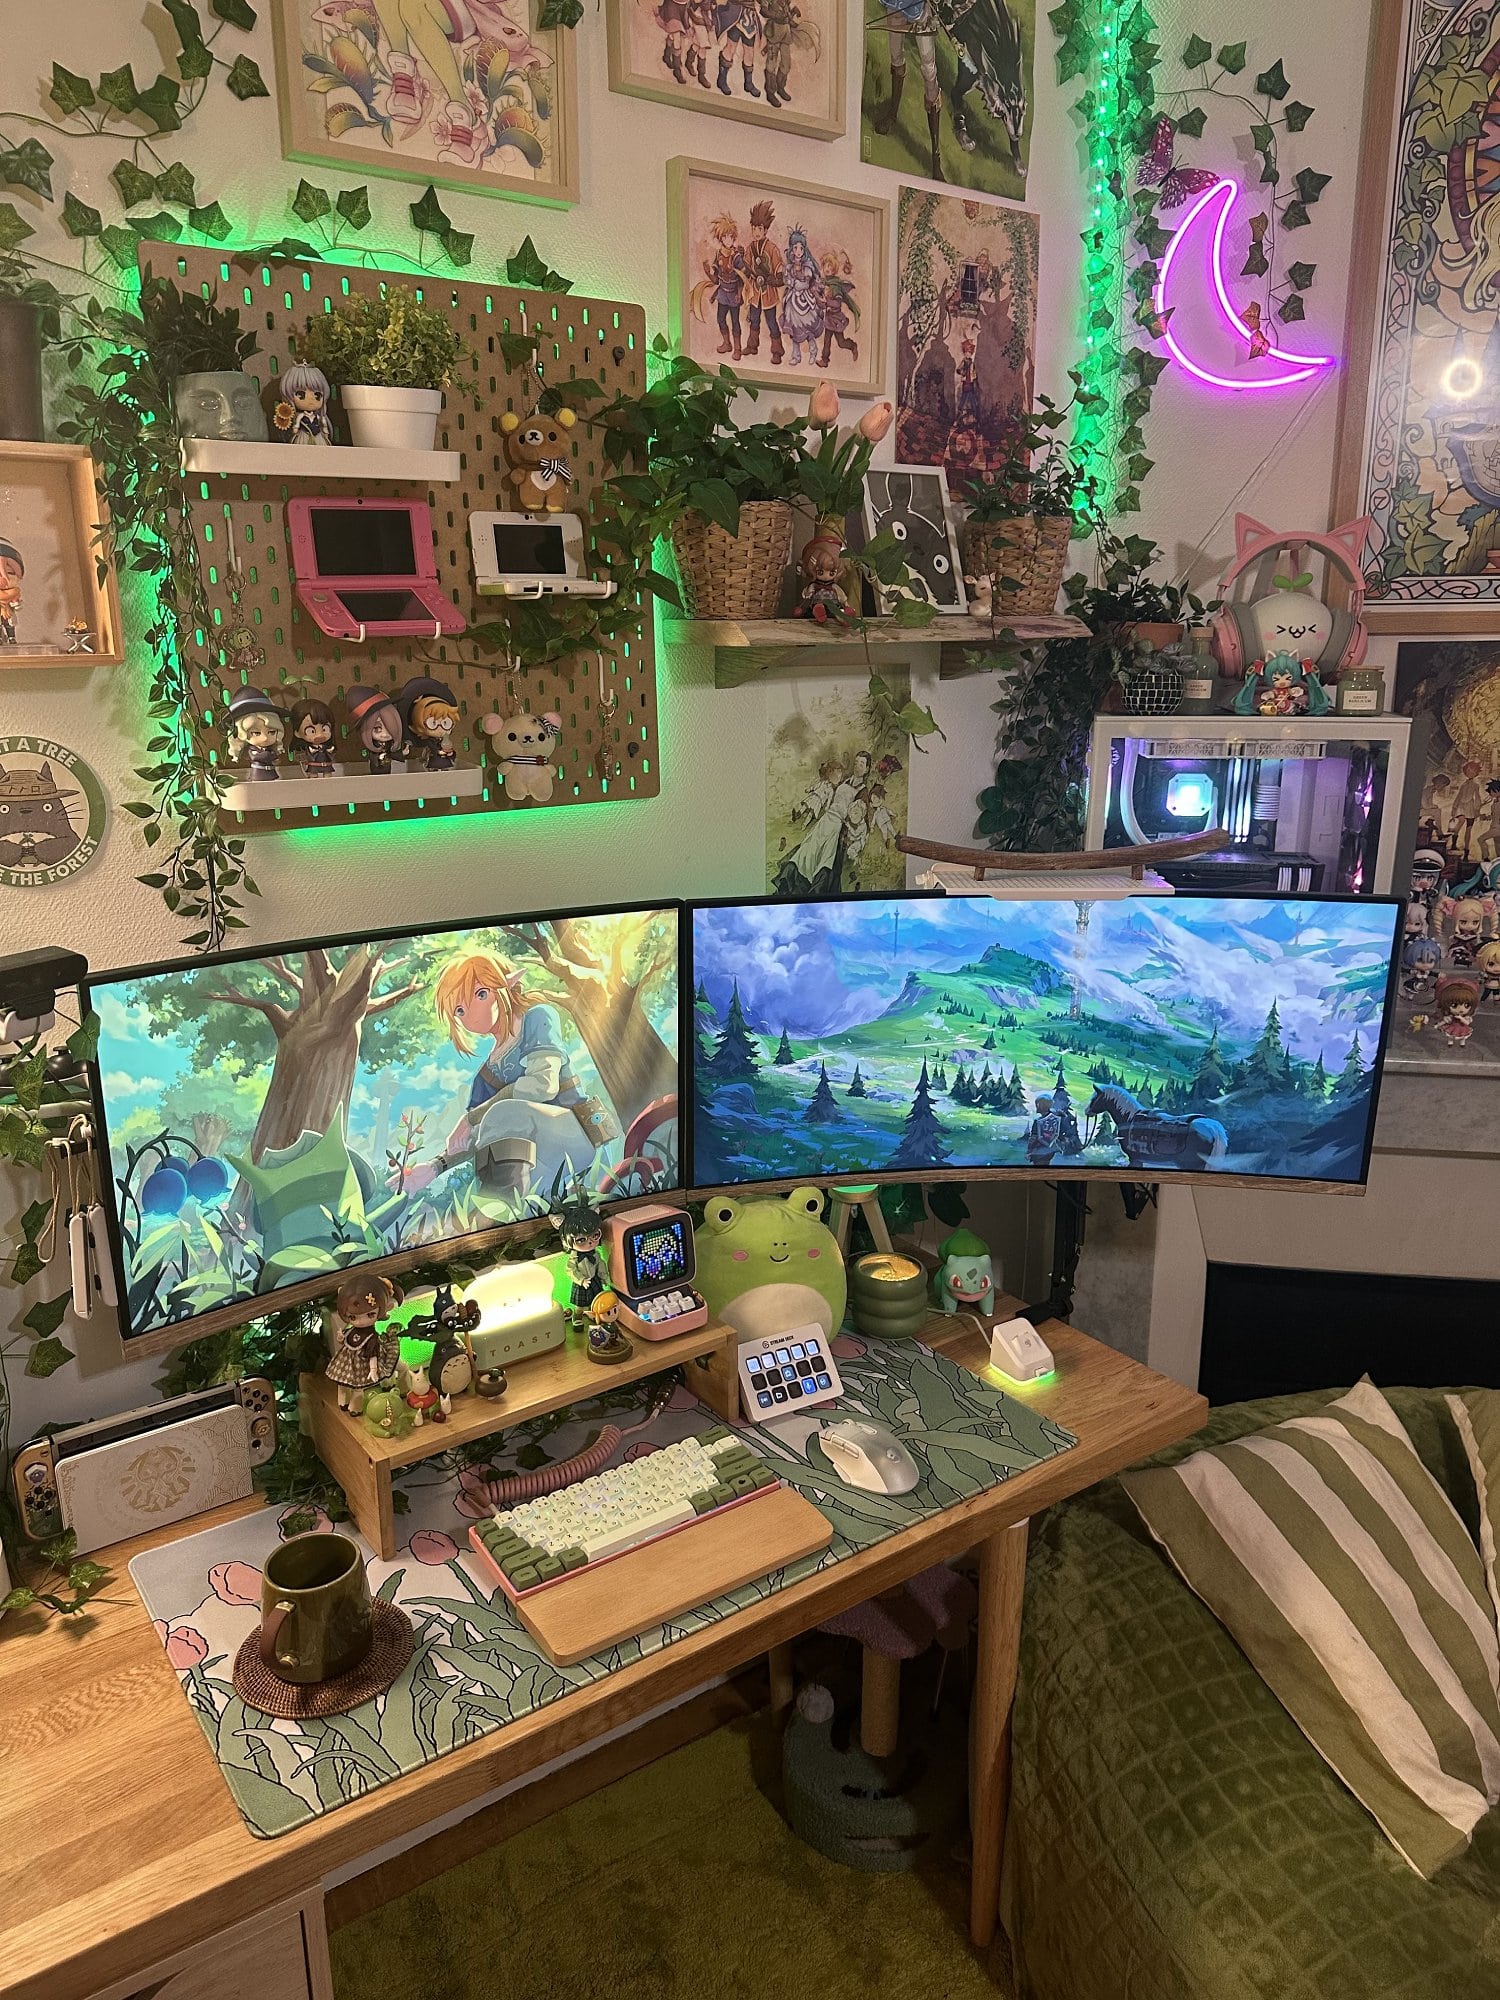 A gaming setup in green with smart LED lighting, artificial plants, Japanese figurines and dolls from anime, manga, and video games, and lots of wall art